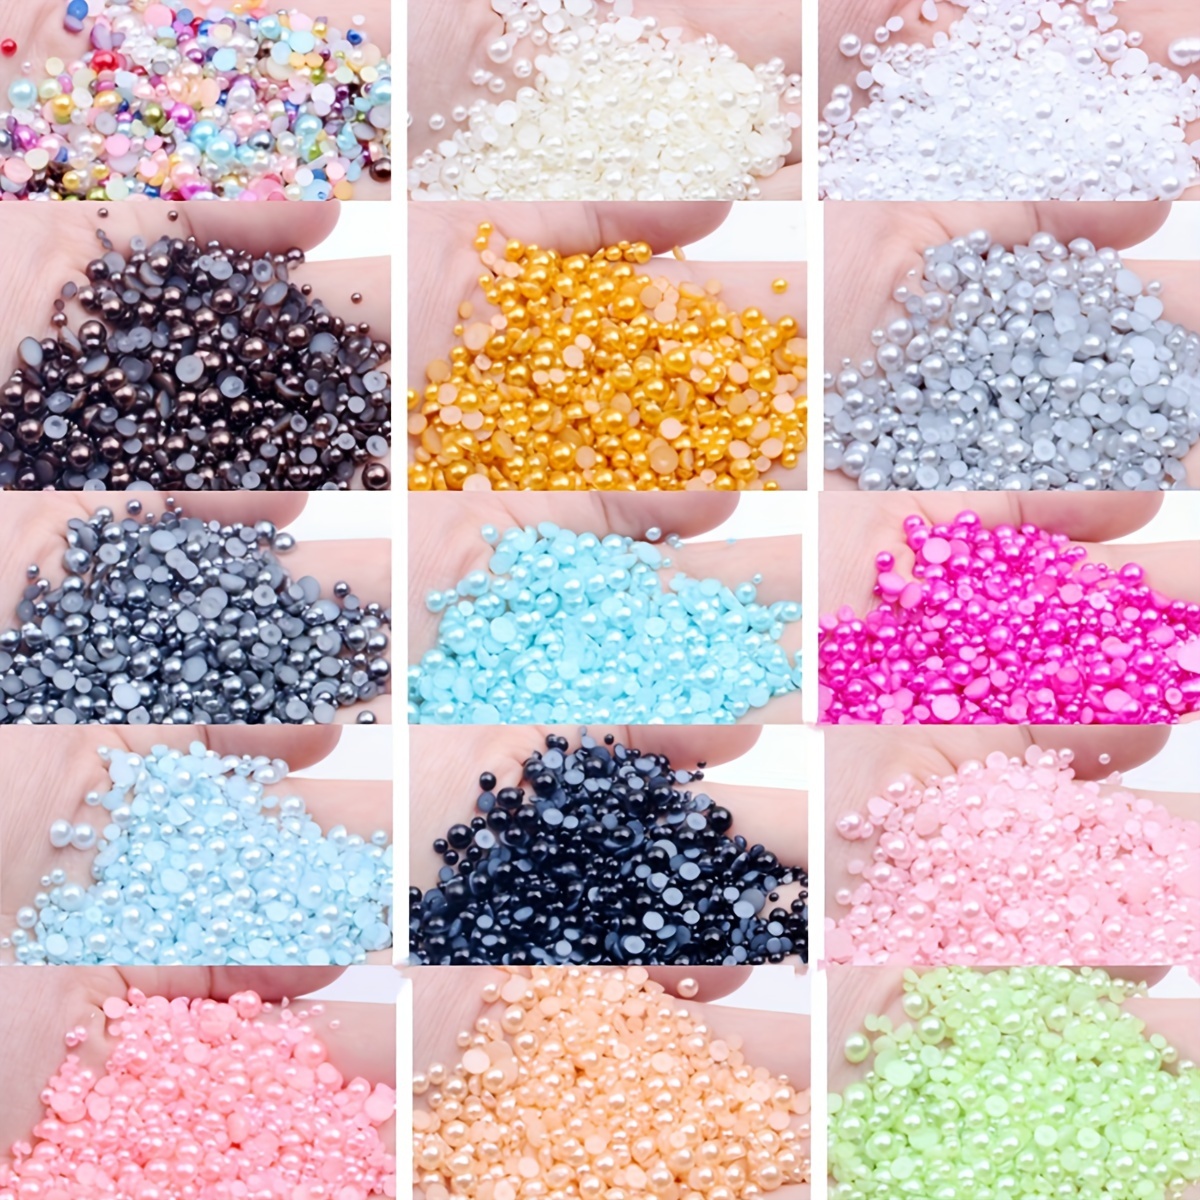 Nail Pearls For Nail Art Decoration,Round Pearls For Crafts,Multiple Size  FlatBack Pearls For Makeup Pearls For Nails DIY Crafting Accessory,Nail